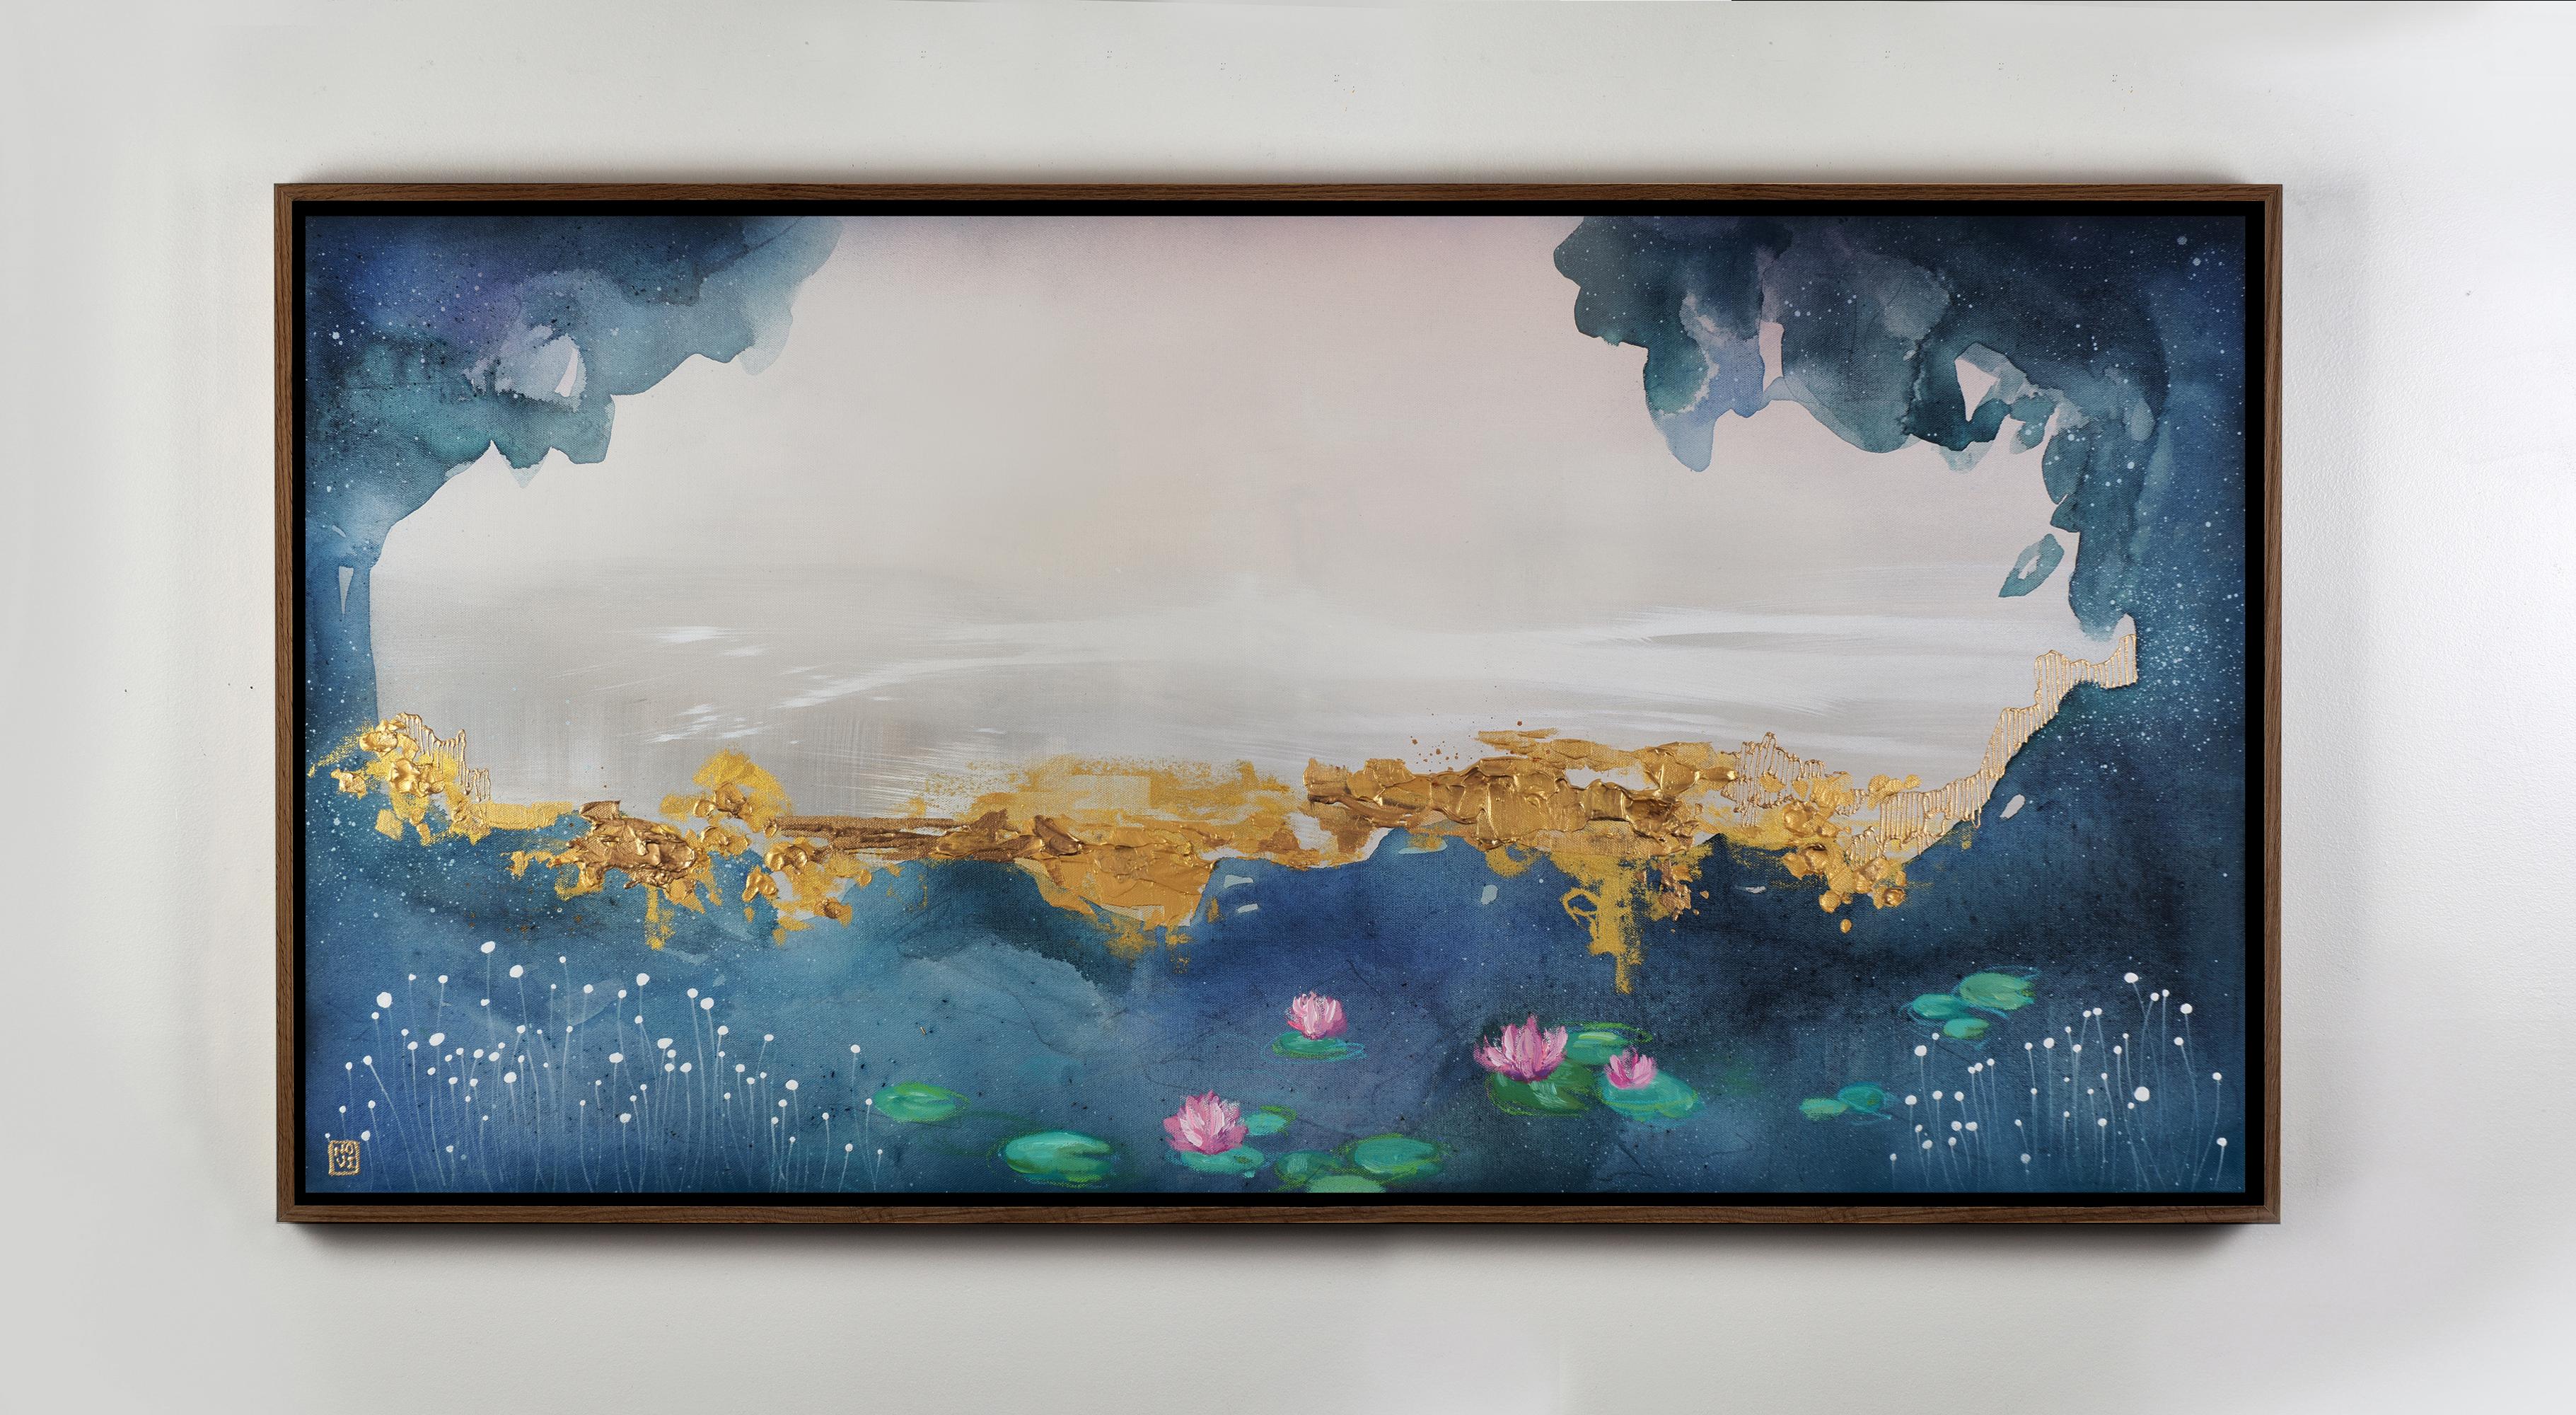 The Art of Dreaming II, Original Framed Contemporary Abstract Landscape Painting, 2022
24